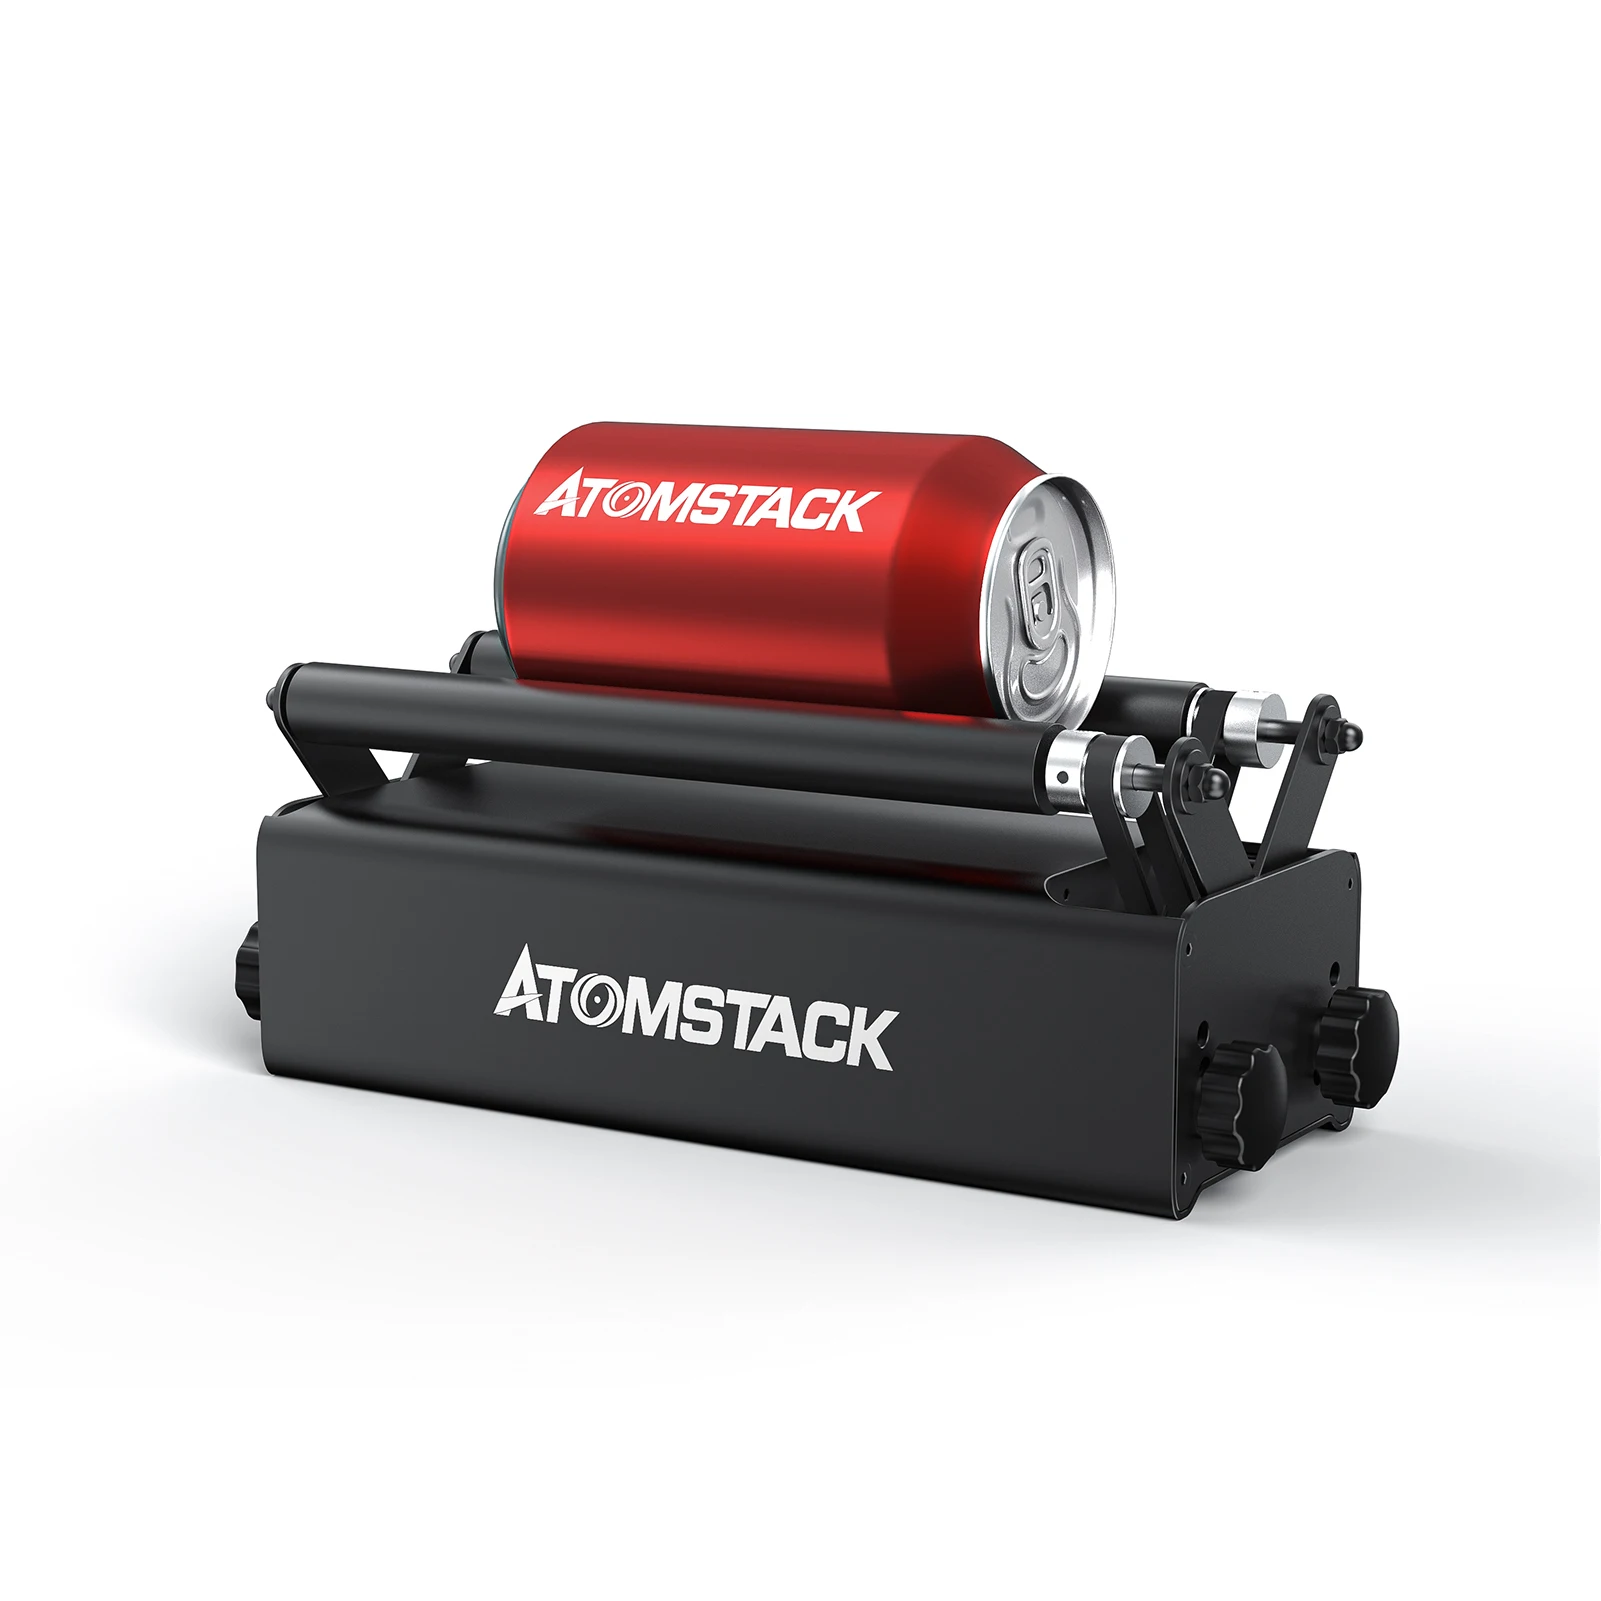 ATOMSTACK R3 Roller for Cylindrical Objects Laser Engraving Machines H9J3 